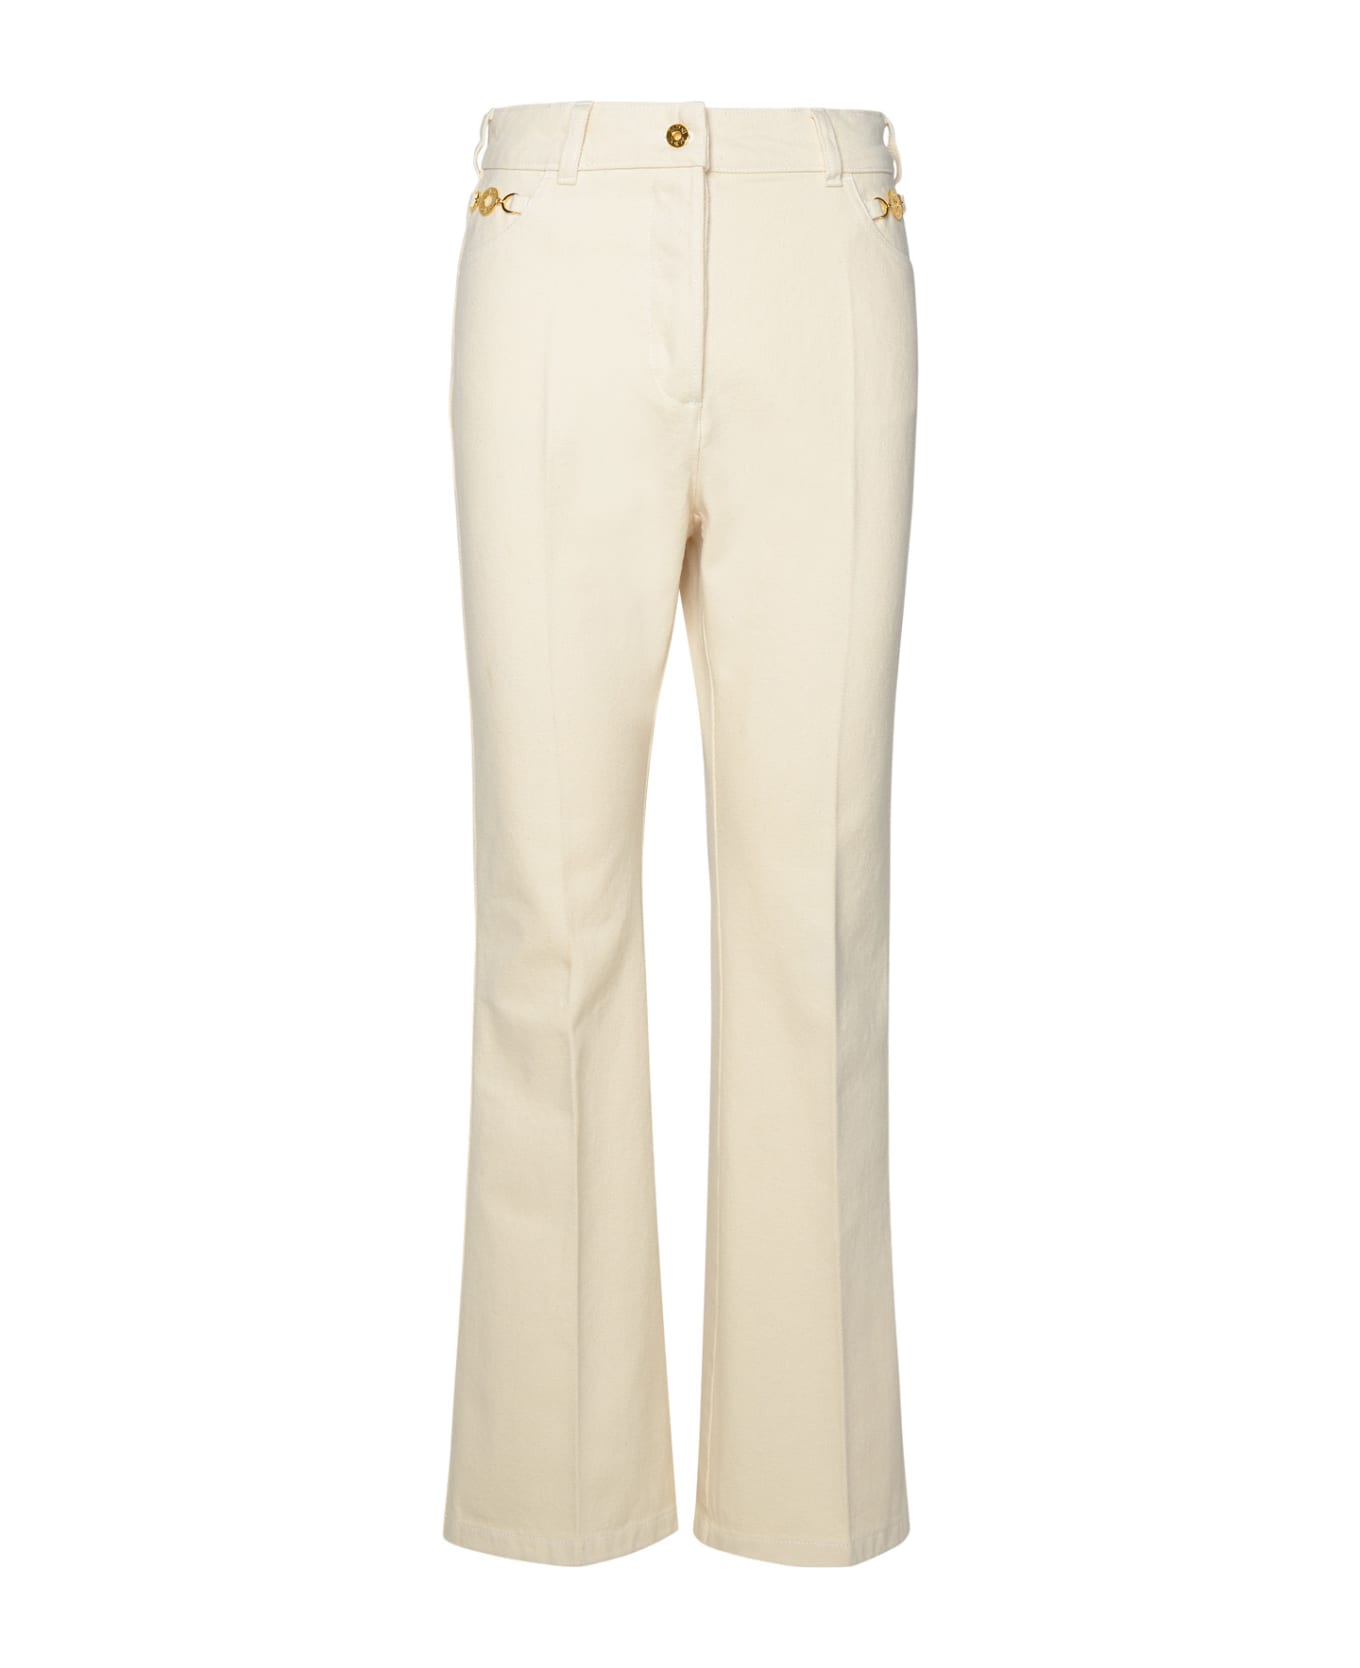 Patou Ivory Cotton Flare Jeans - NEUTRALS ボトムス